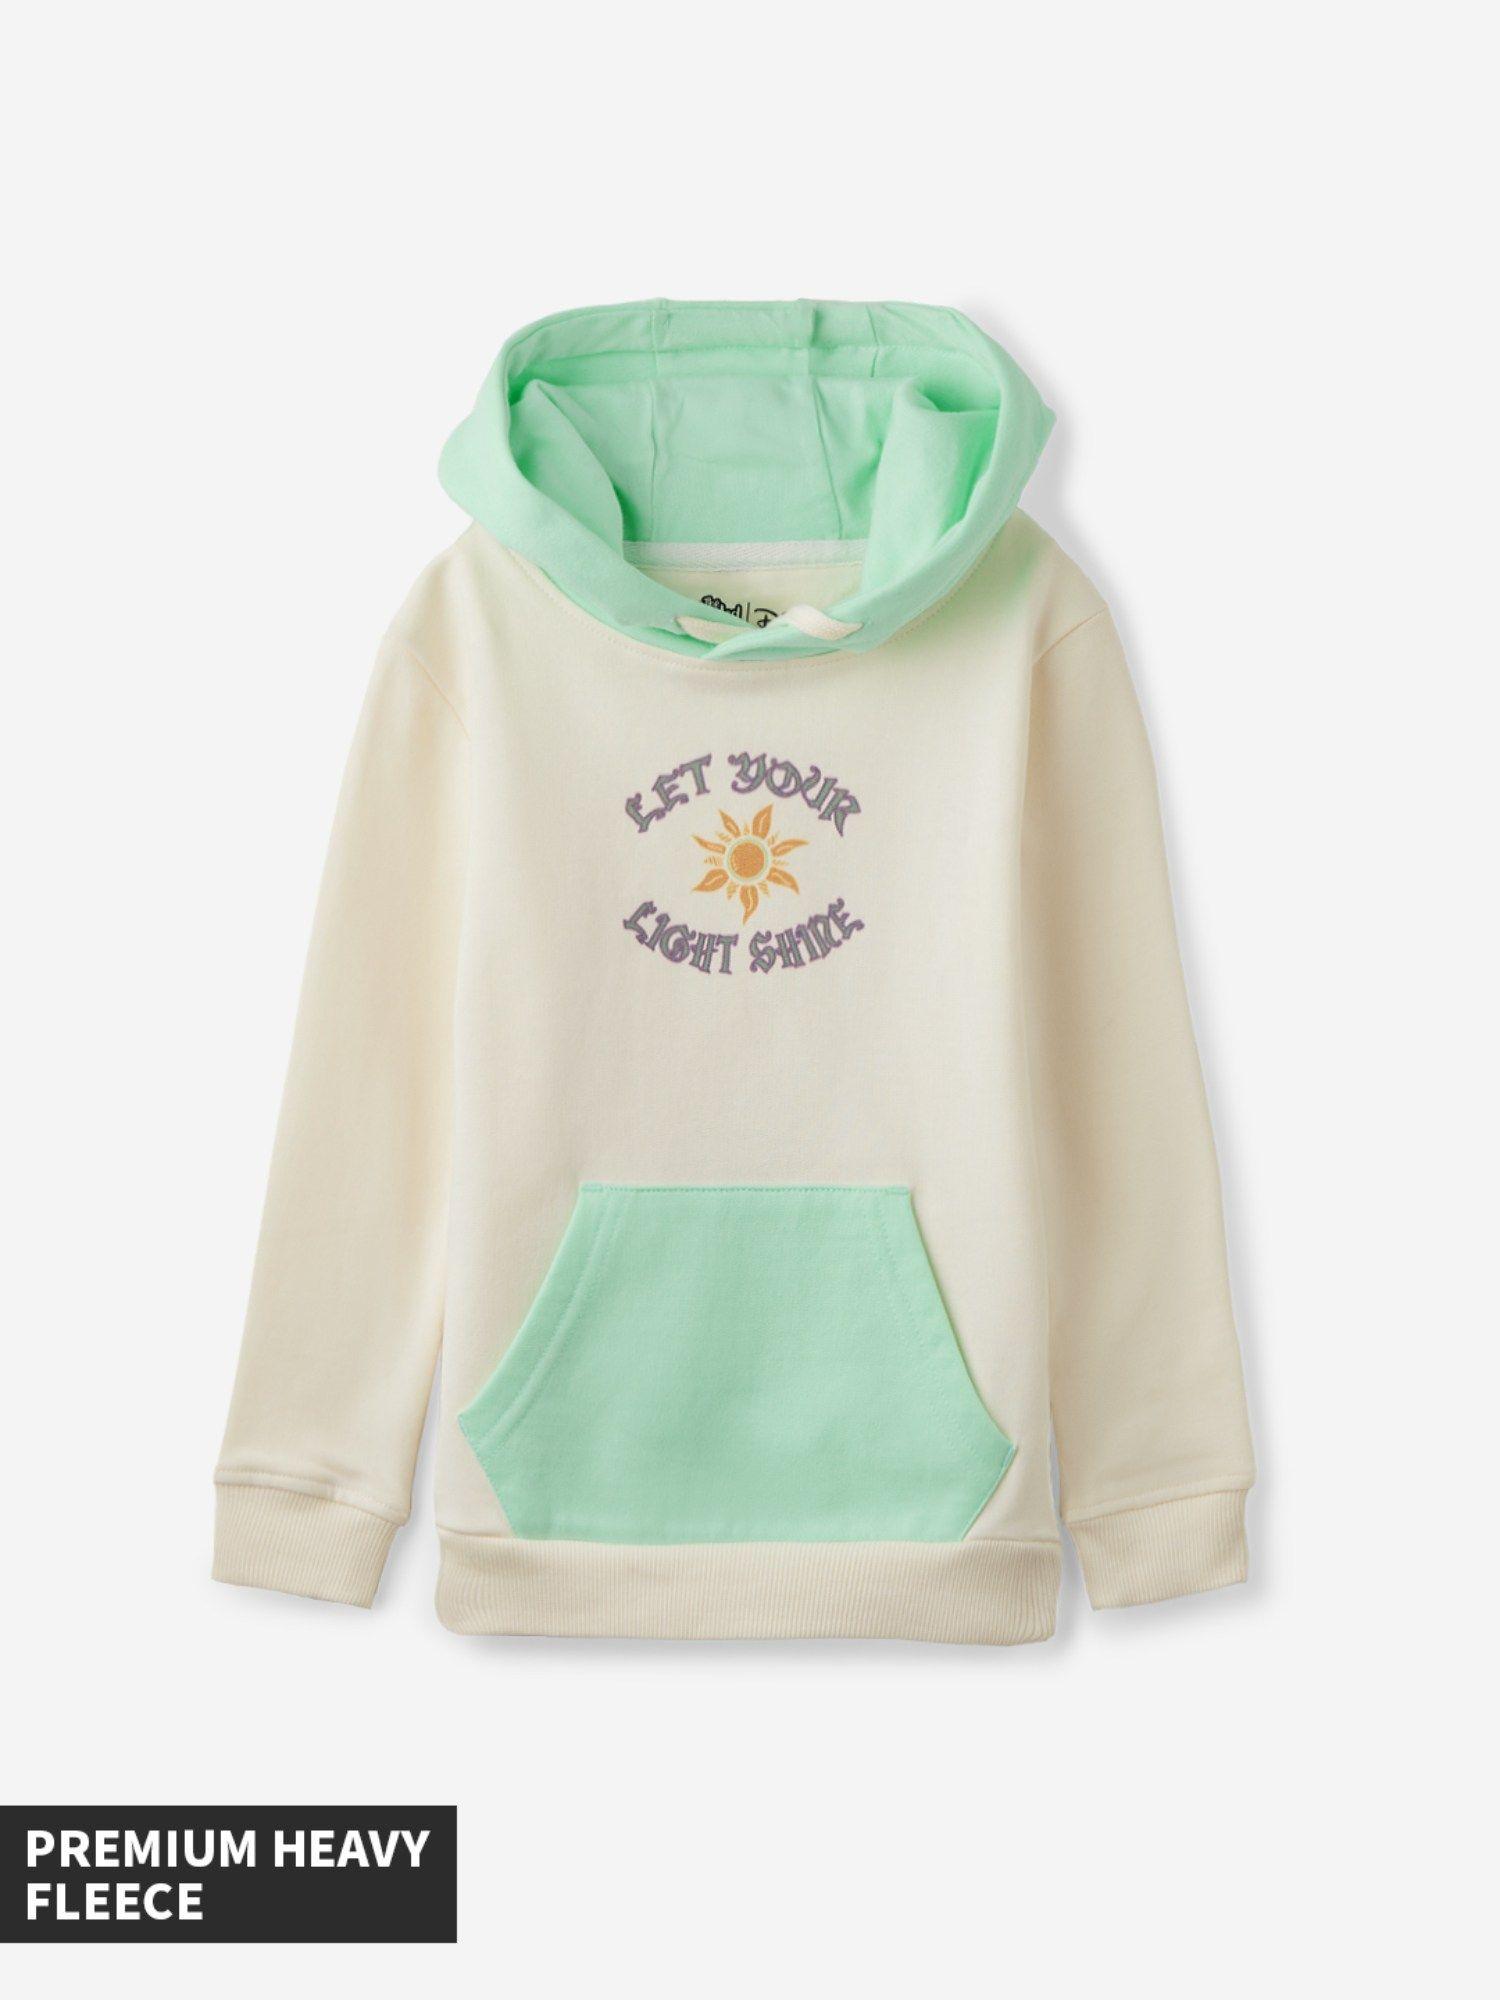 official-disney:-let-your-light-shine-girls-cotton-hoodie